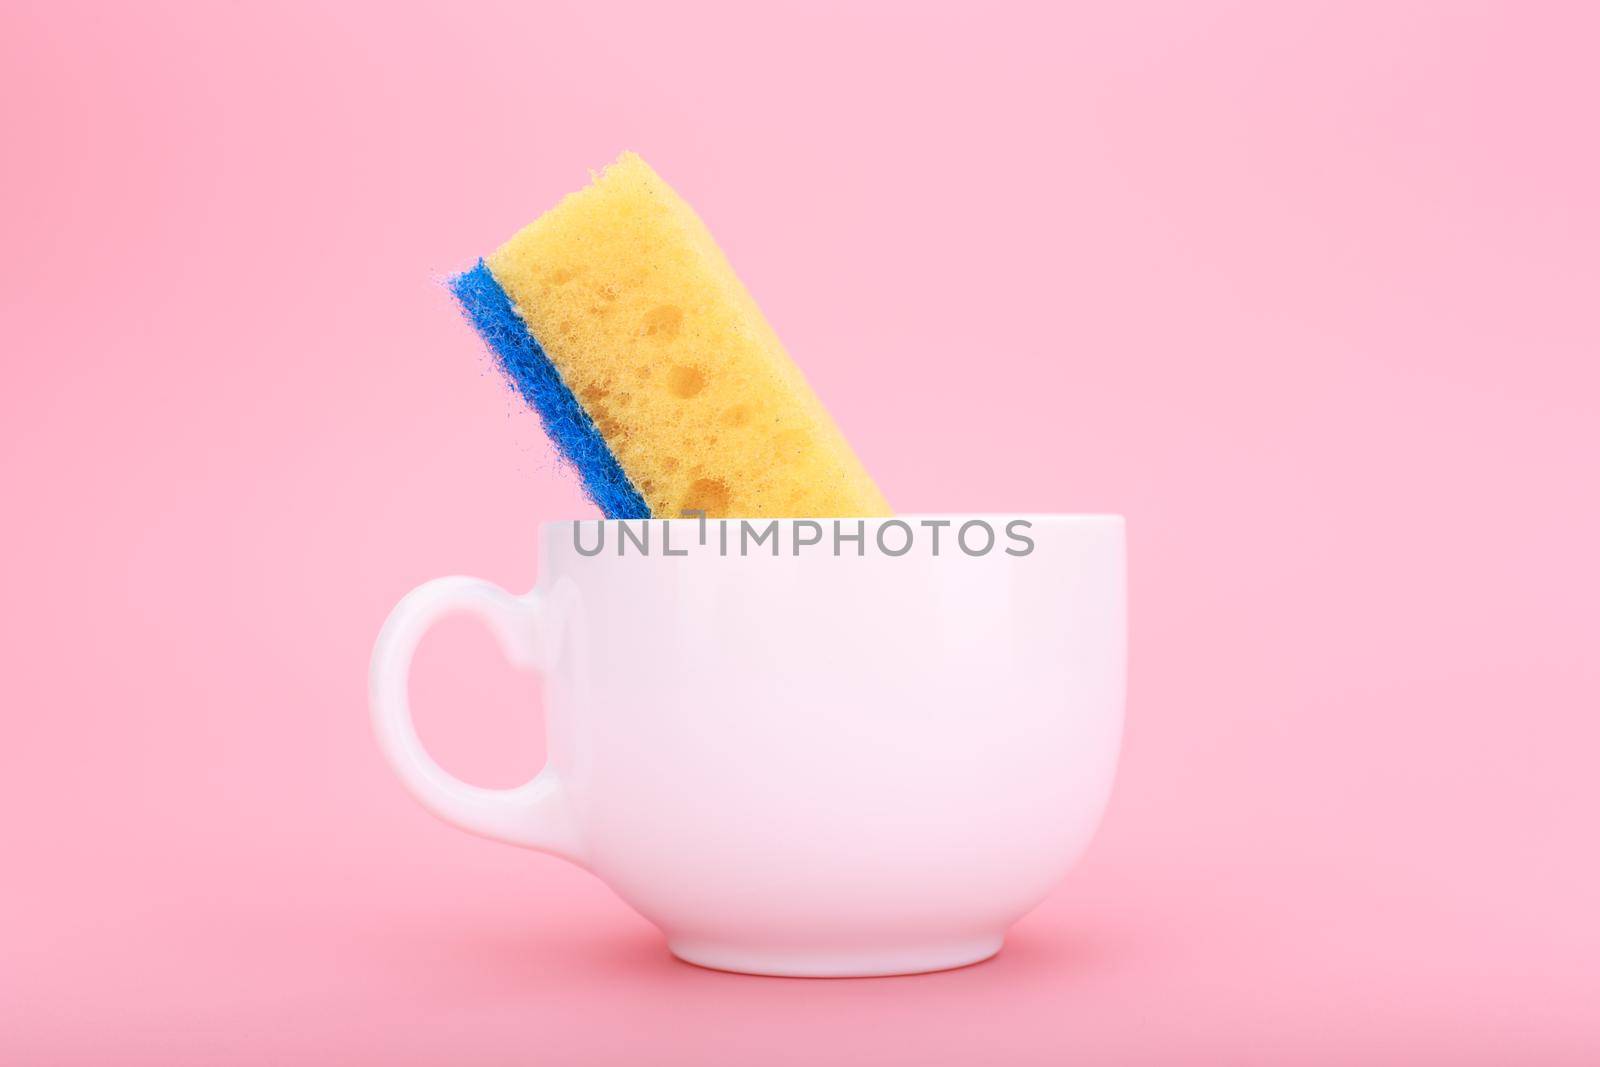 Creative, minimal dishwashing concept. Simple composition with yellow cleaning kitchen sponge in white ceramic cup on pink background